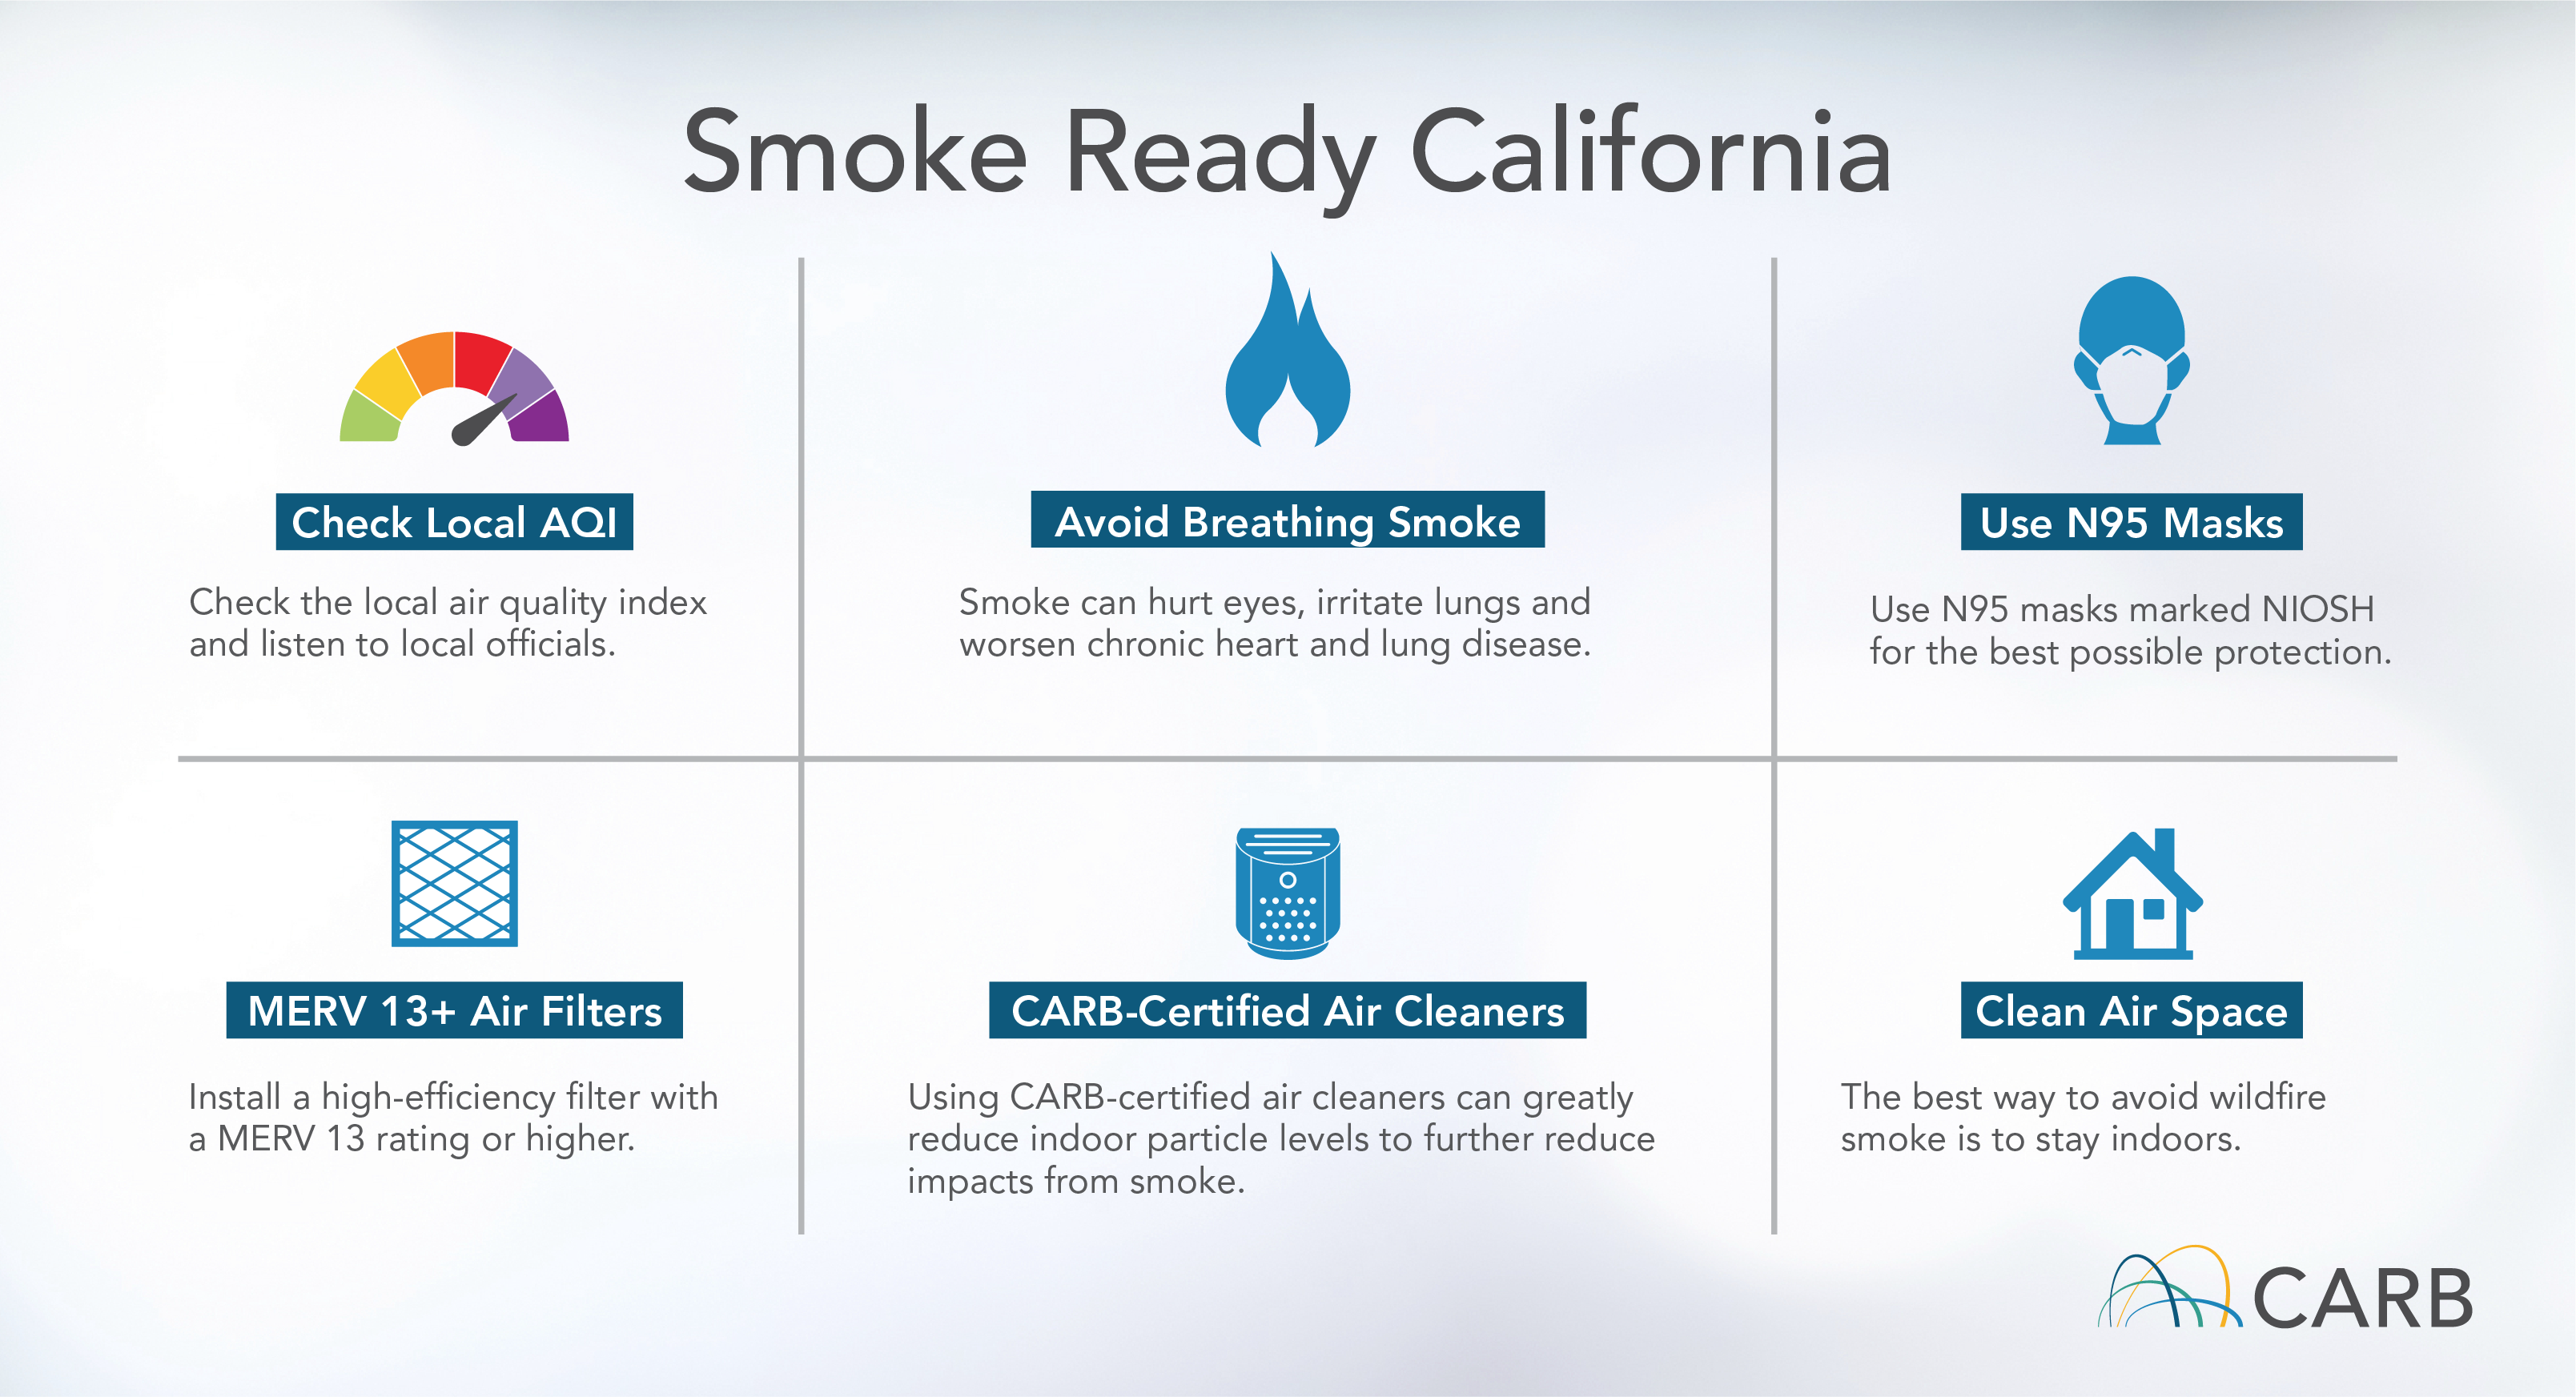 Smoke Ready California: Check Local AQI: Check local air quality index levels and listen to local officials. Avoid Breathing Smoke: Smoke can hurt eyes, irritate lungs and worsen chronic heart and lung disease. Use N95 Masks: Use N95 masks marked NIOSH for the best possible protection. MERV 13+ Air Filters: Install a high-efficiency filter with a MERV 13 rating or higher. CARB-Certified Air Cleaners: Using CARB-certified air cleaners can greatly reduce indoor particle levels to further reduce impacts from smoke. Clean Air Space: The best way to avoid wildfire smoke is to stay indoors.